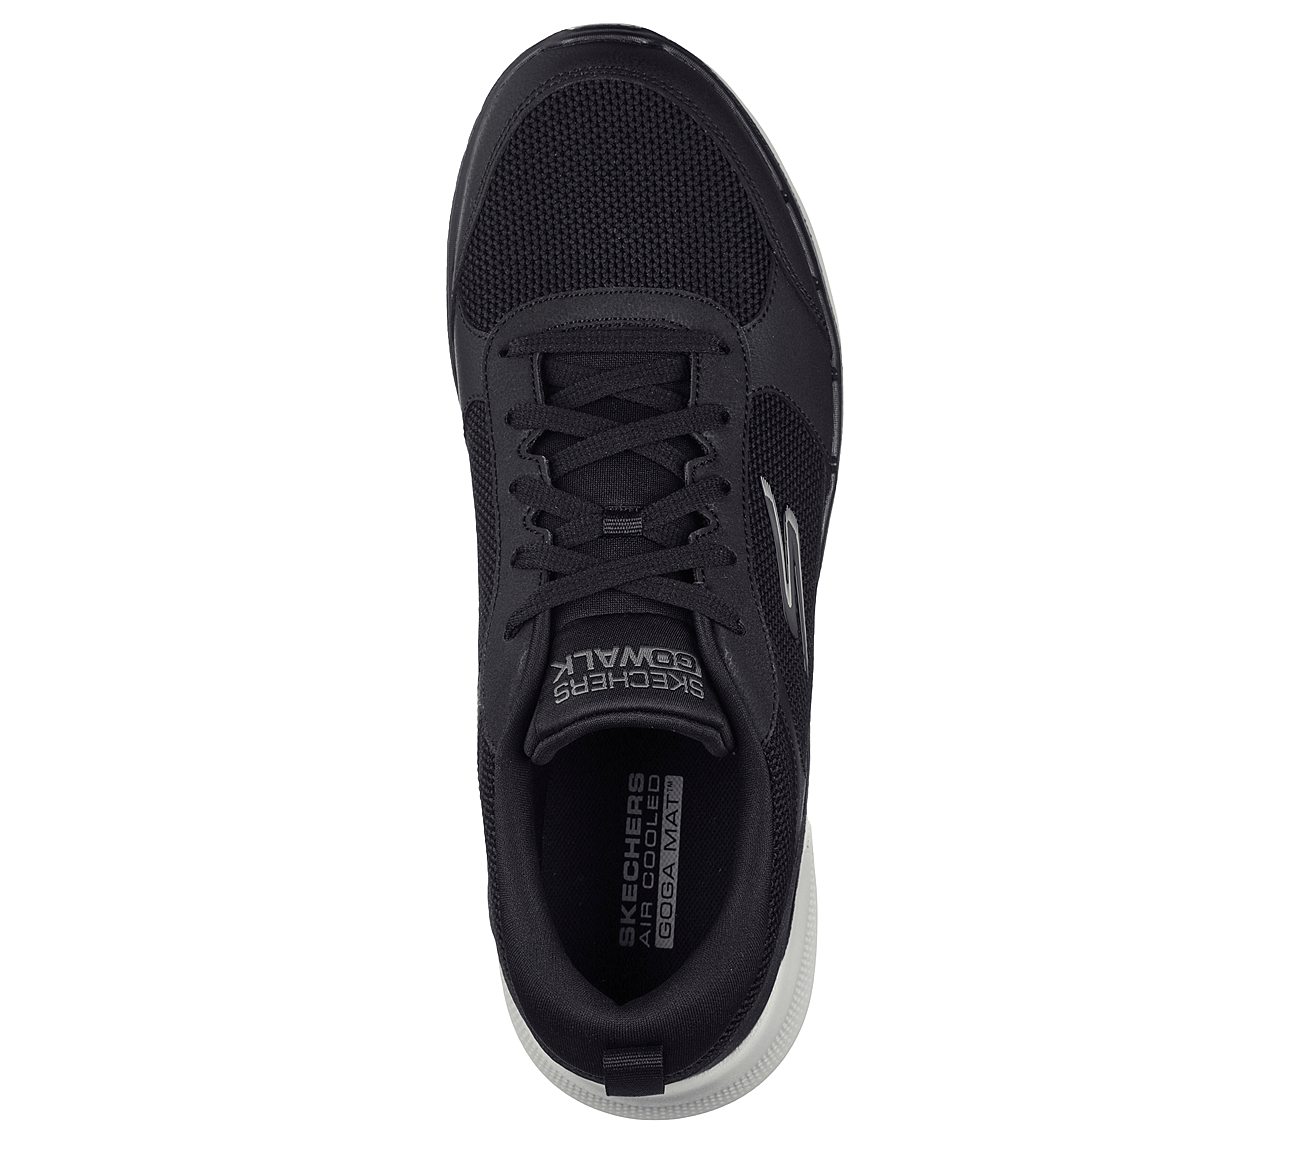 Skechers Black/Grey Go Walk 6 Compete Mens Lace Up Shoes - Style ID ...